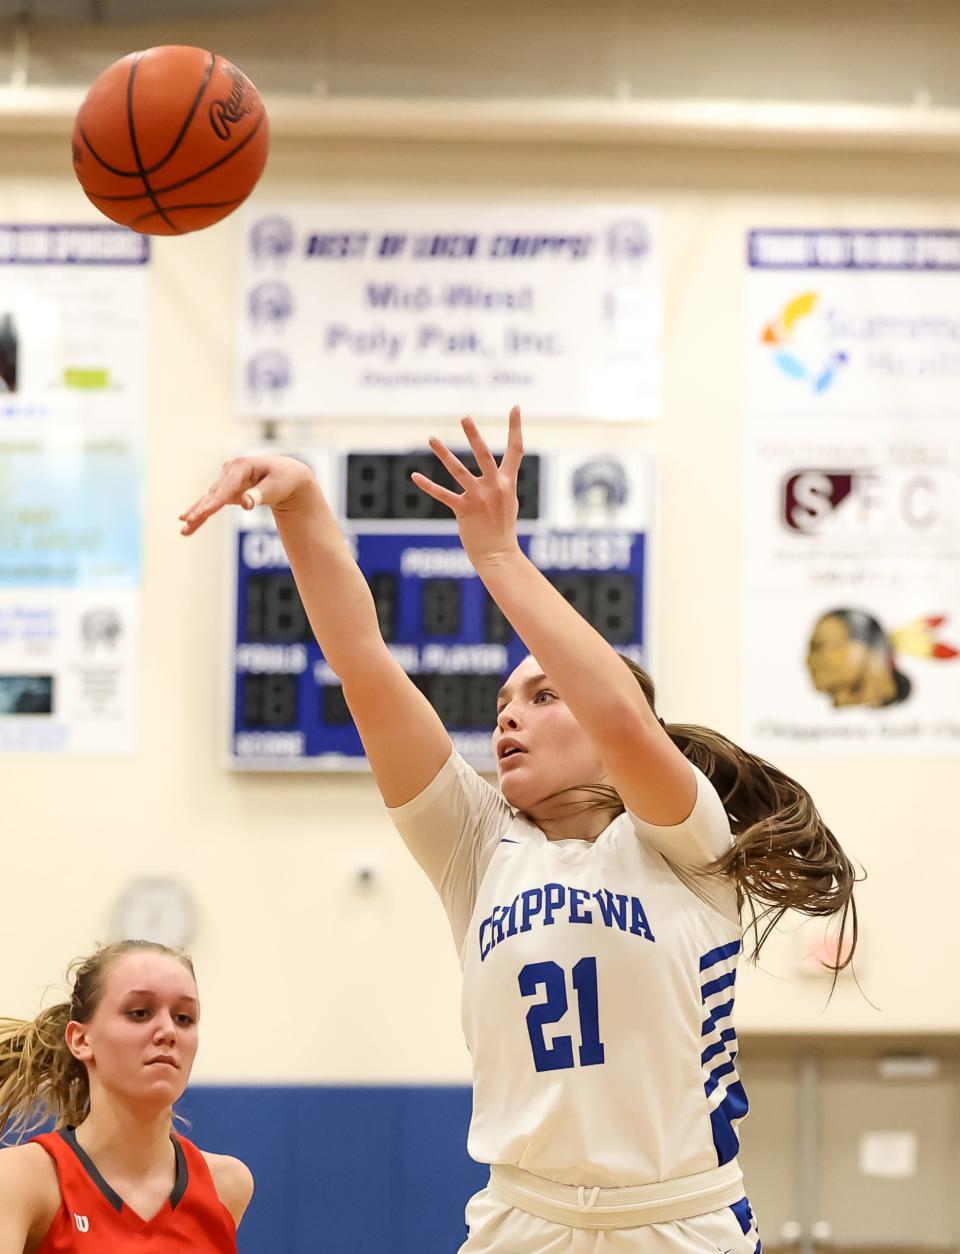 Chippewa's Annabel Rodriguez scored more than 1,000 points in her career, helping the Chipps to the state title game for the second time in program history.